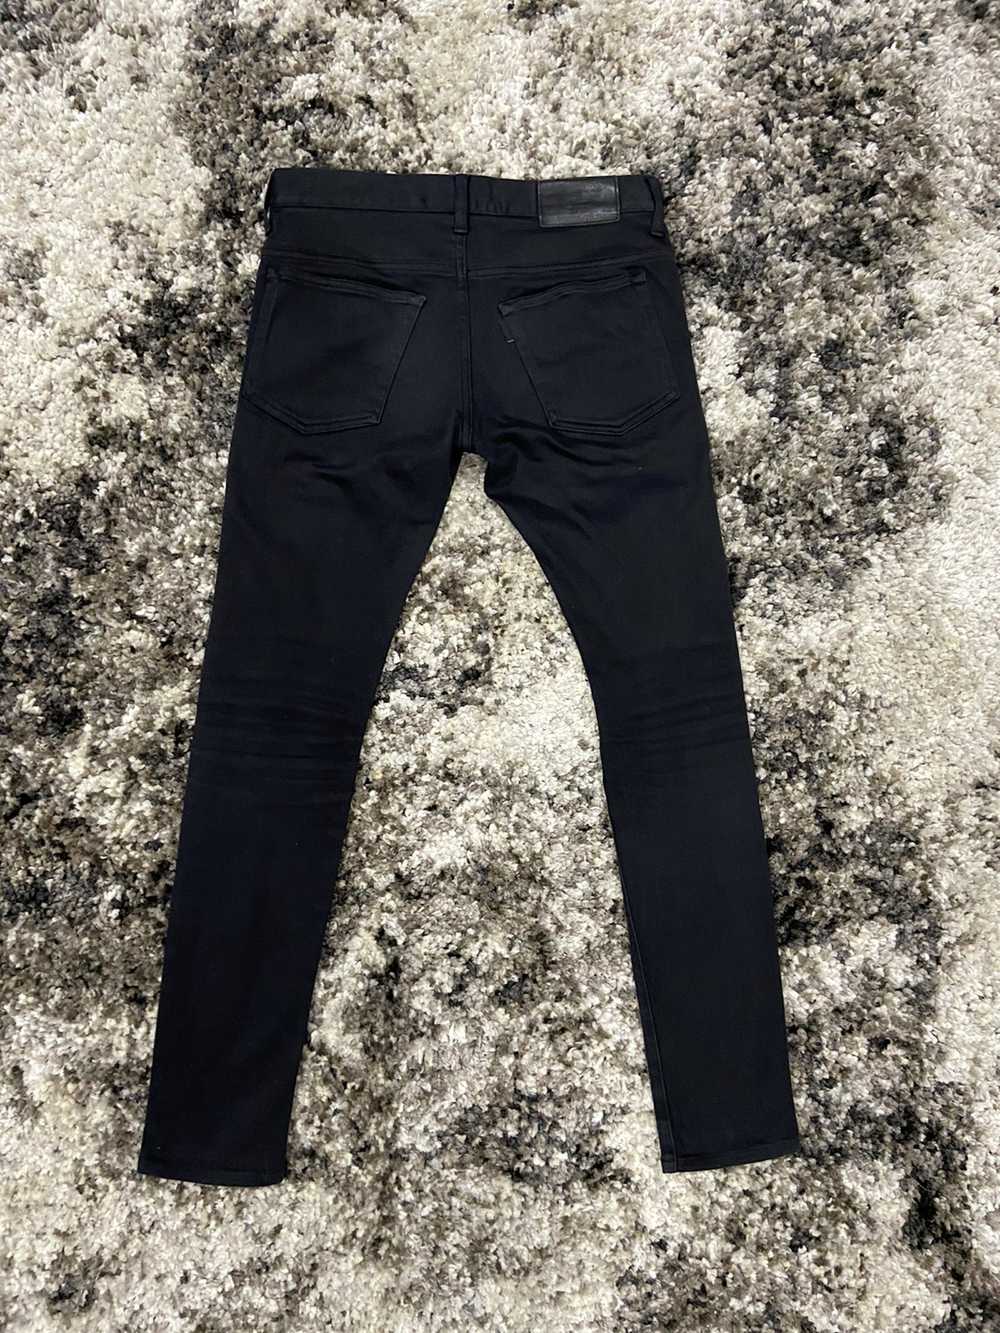 Jun Takahashi × Undercover Undercover Jeans - image 2